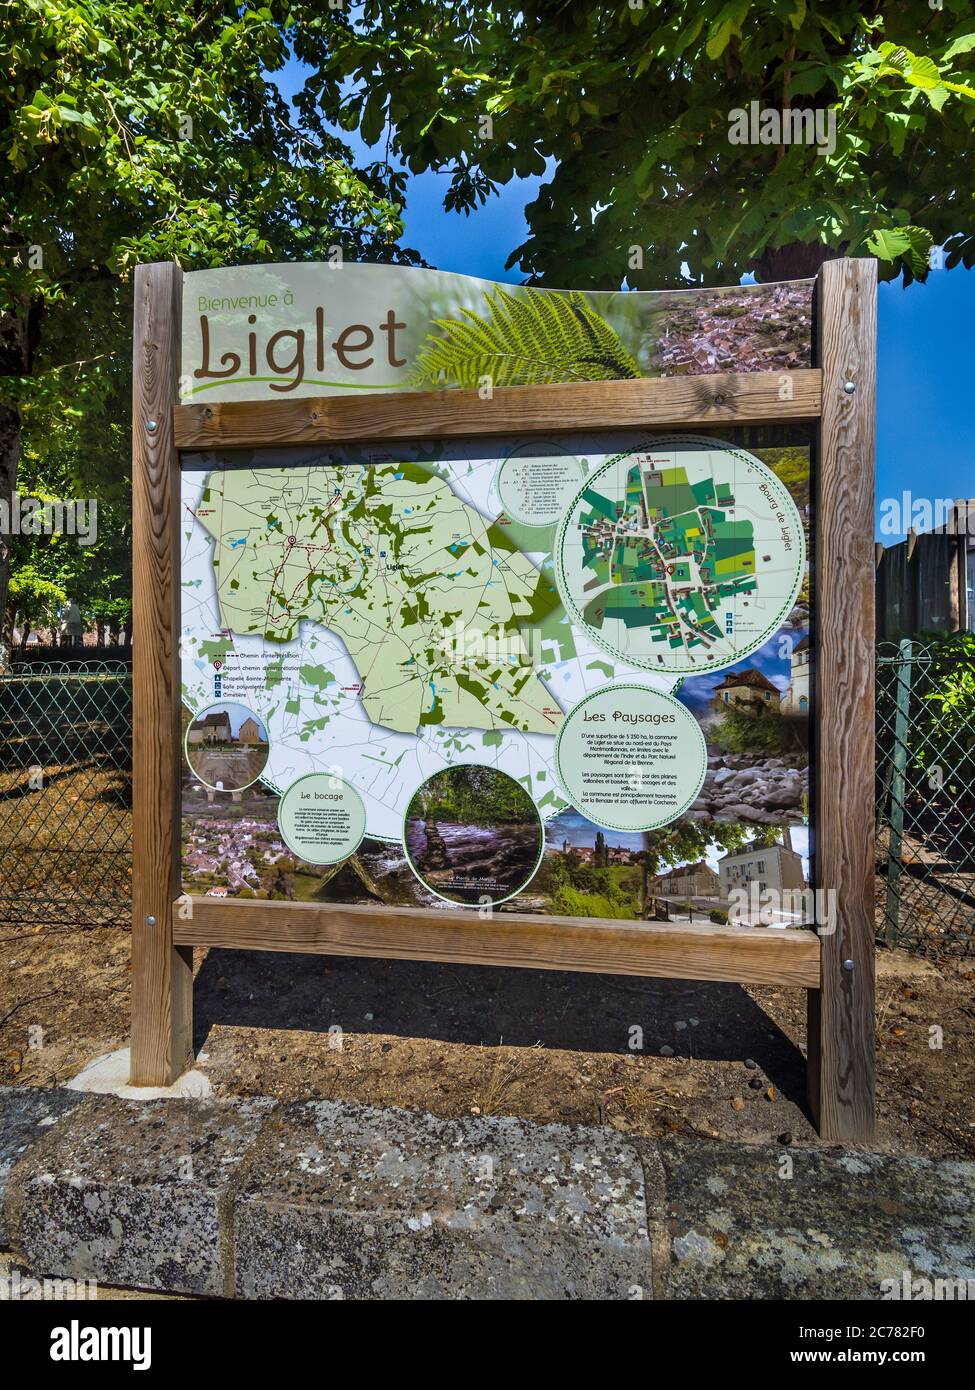 Town centre information board describing locality and attractions - Lignac, Vienne (86), France. Stock Photo